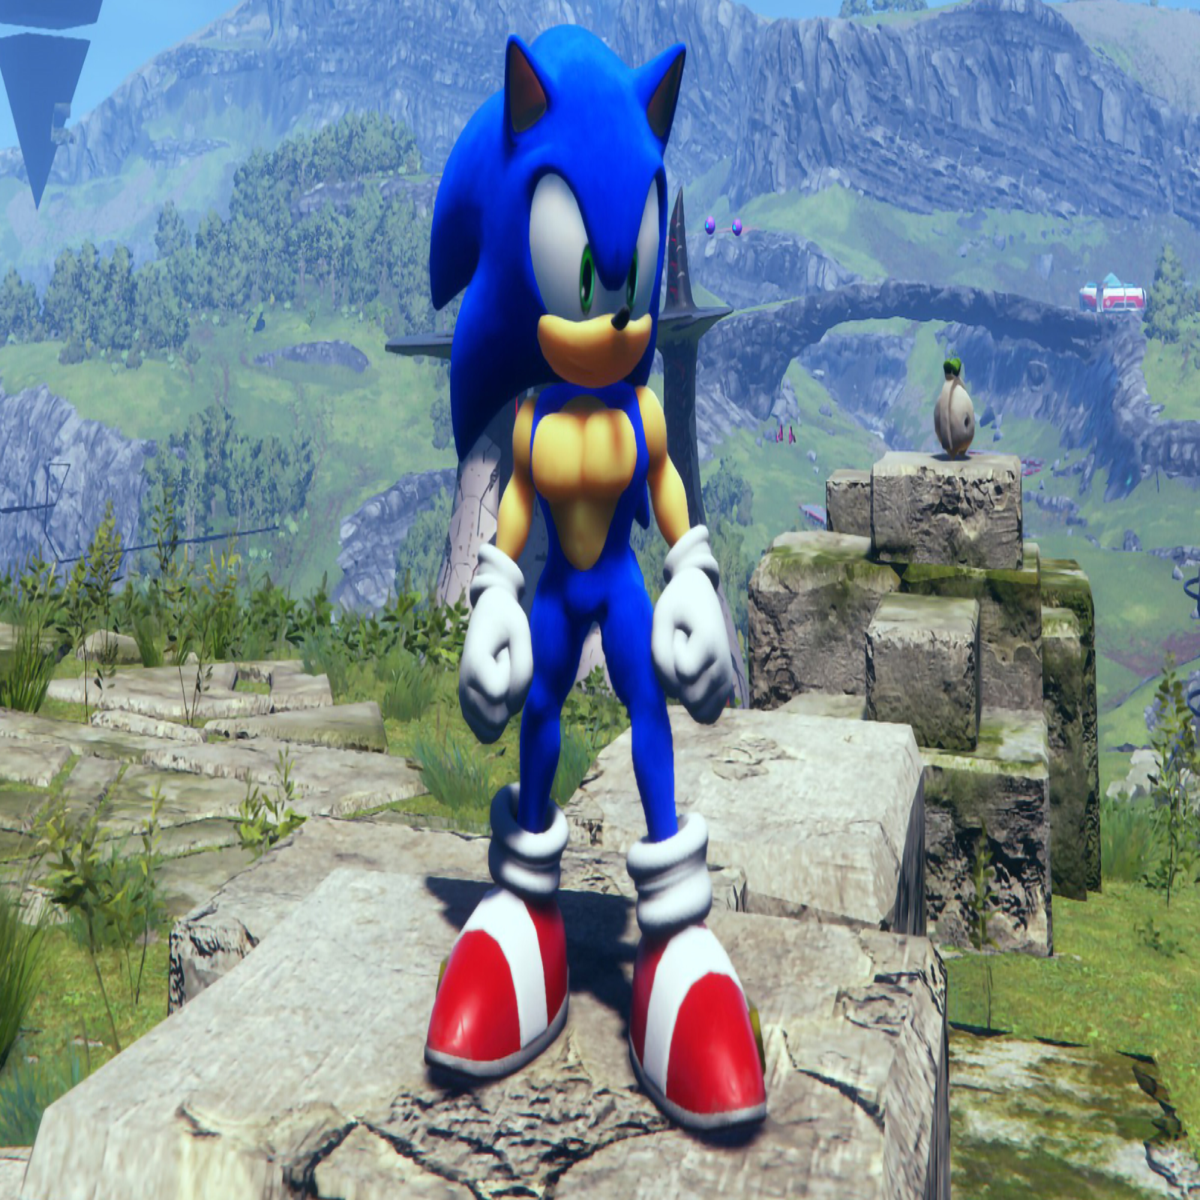 These Sonic Frontiers mods are getting out of hand.